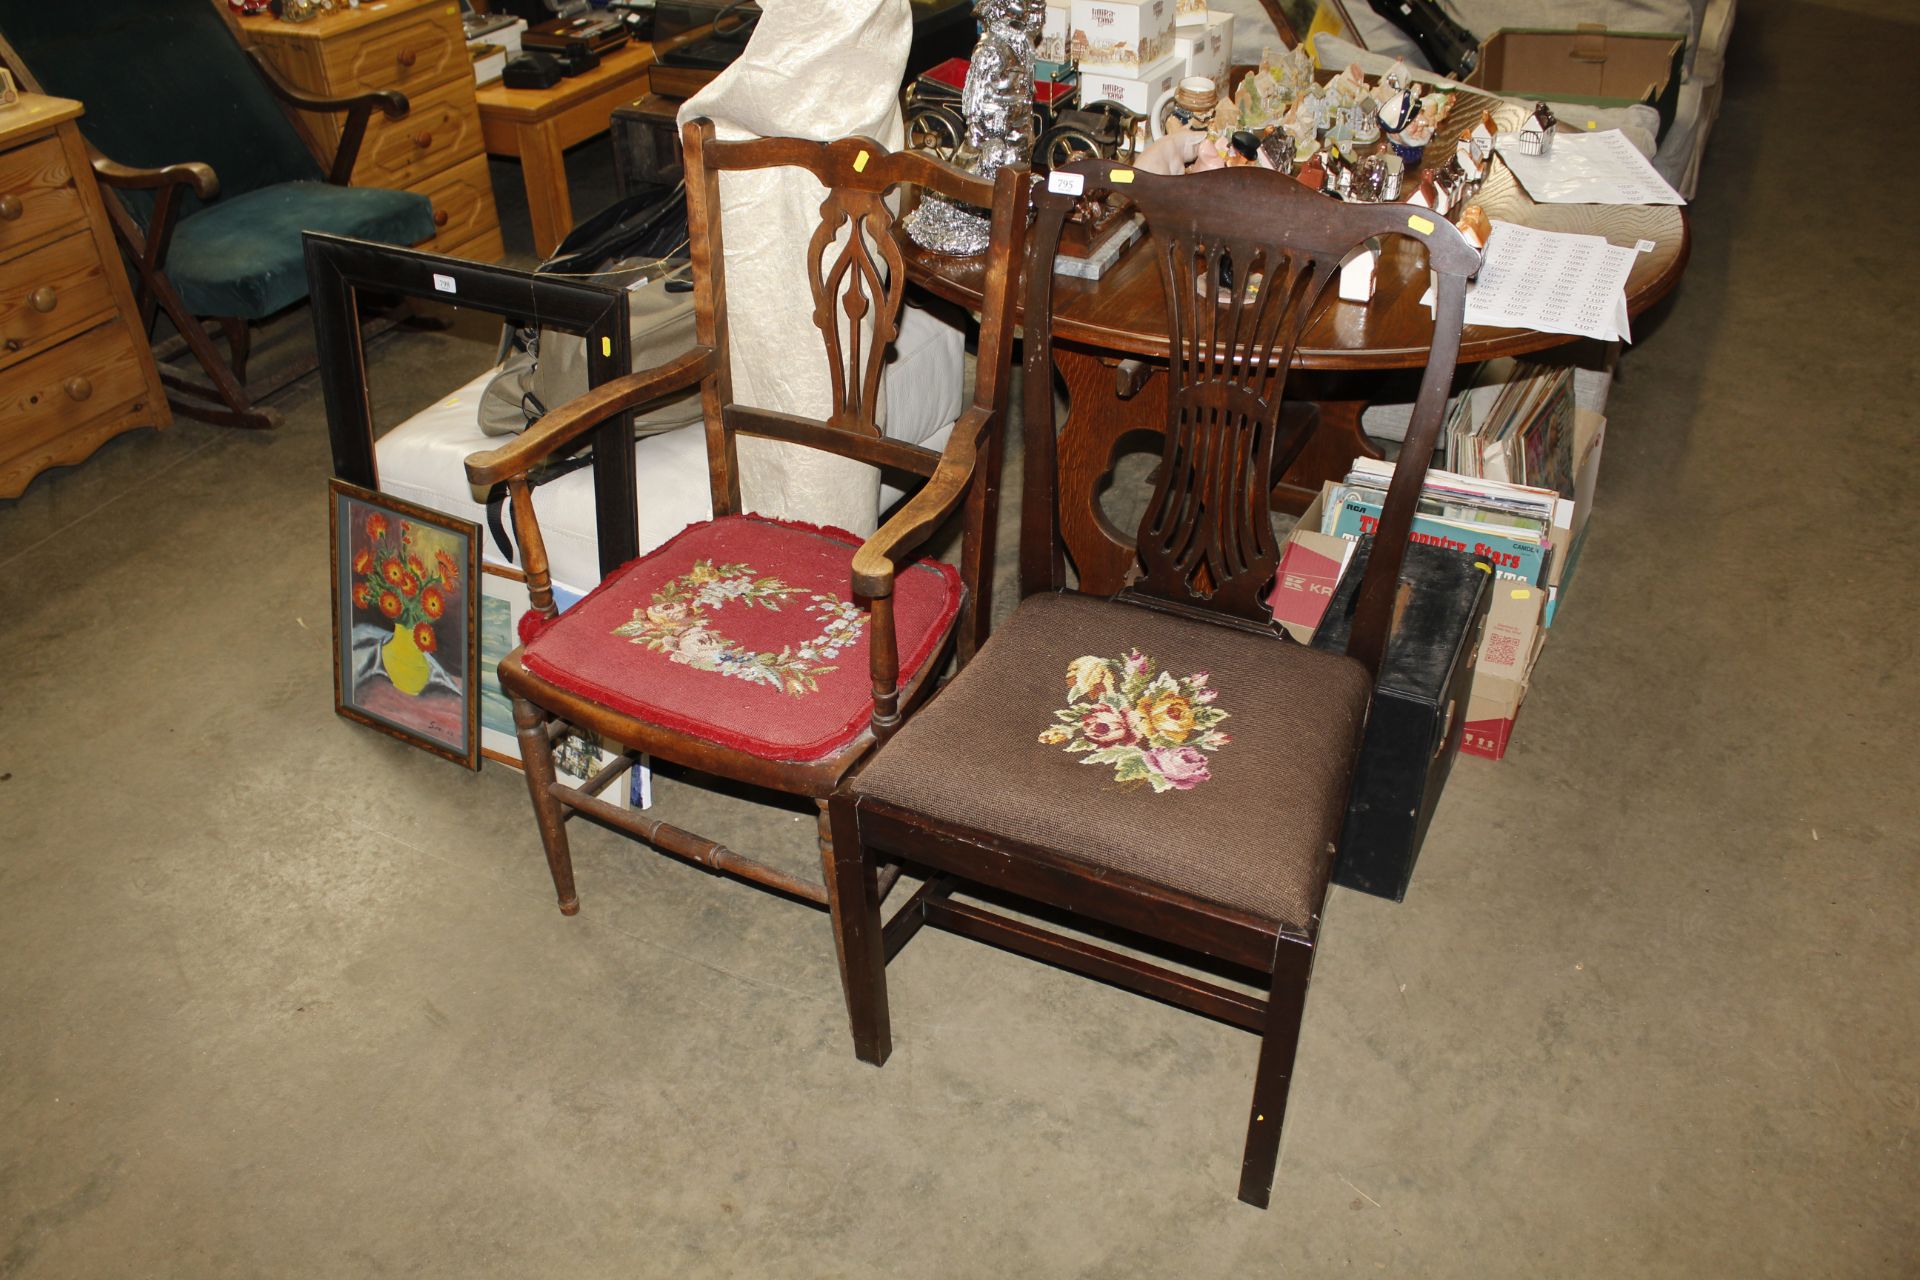 An Edwardian elbow chair and mahogany dining chair